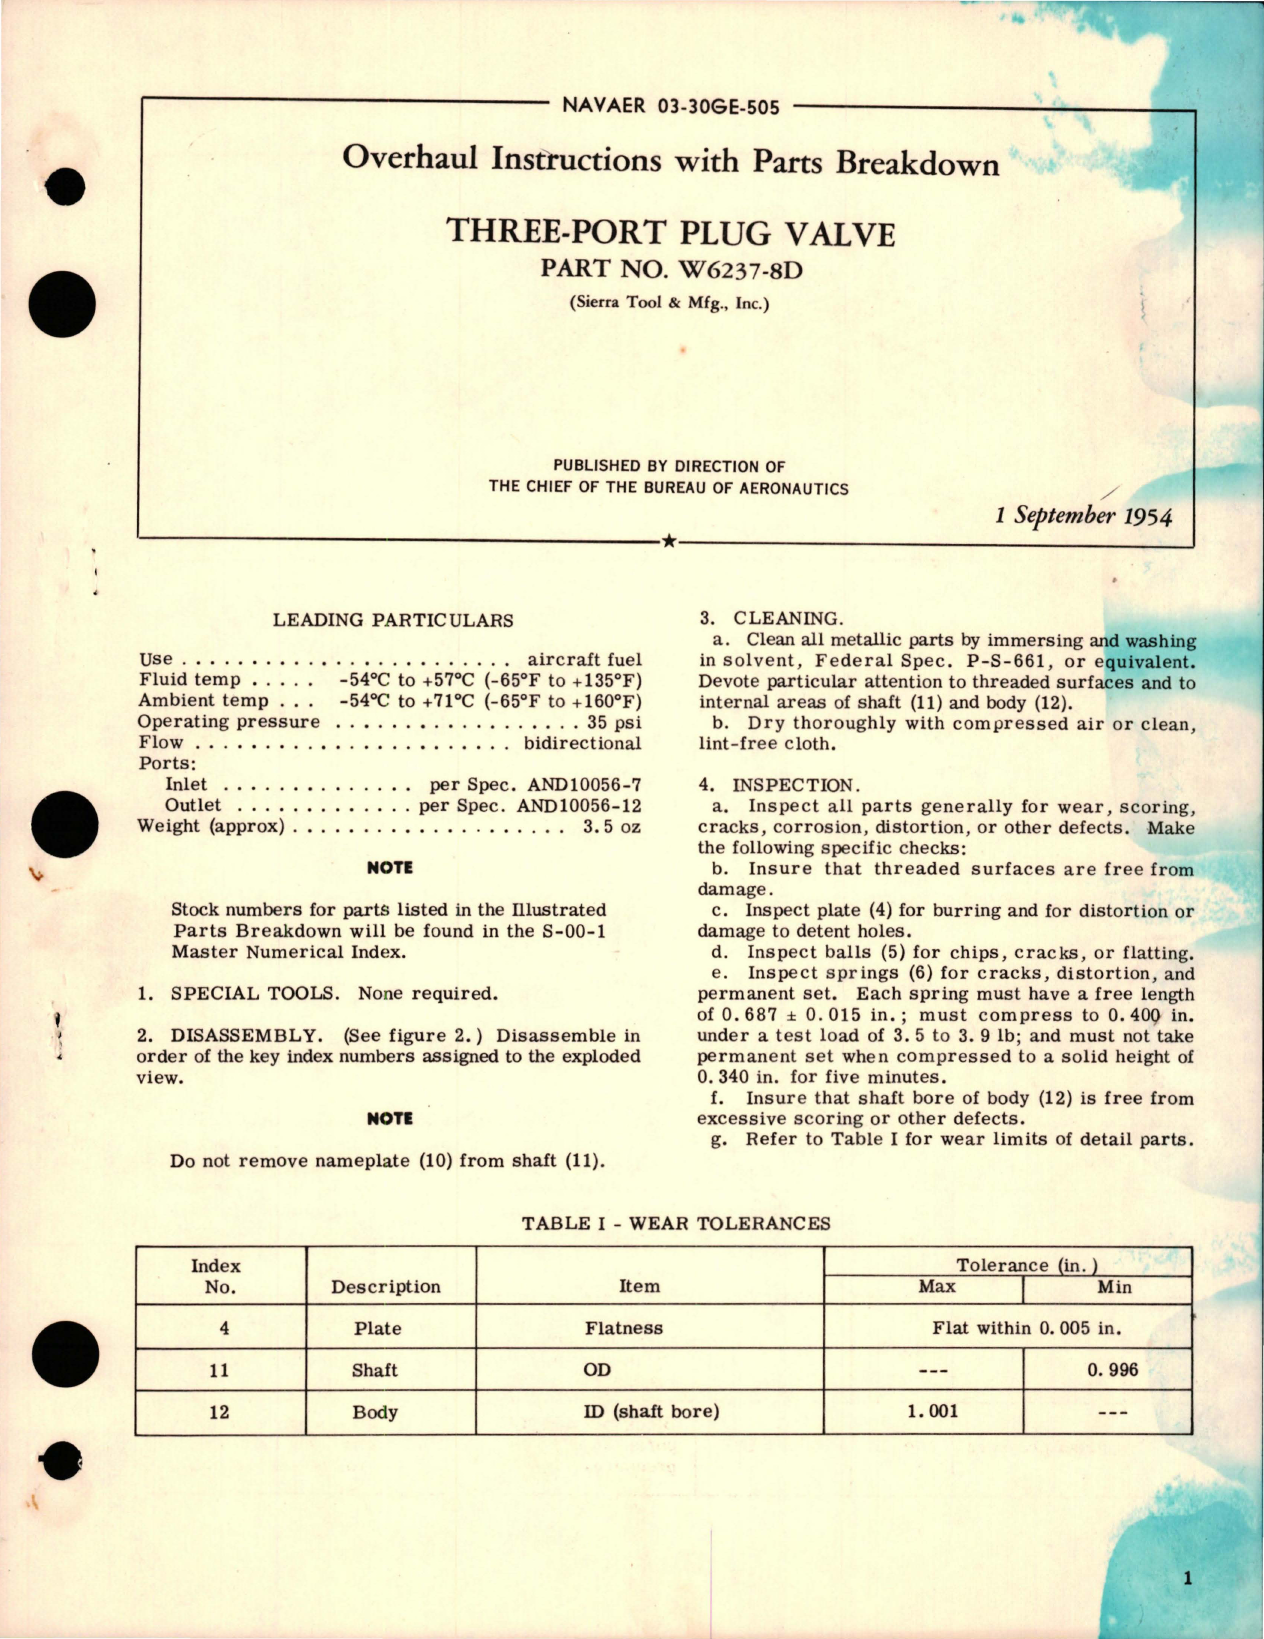 Sample page 1 from AirCorps Library document: Overhaul Instructions with Parts Breakdown for Three-Port Plug Valve - Part W6237-8D